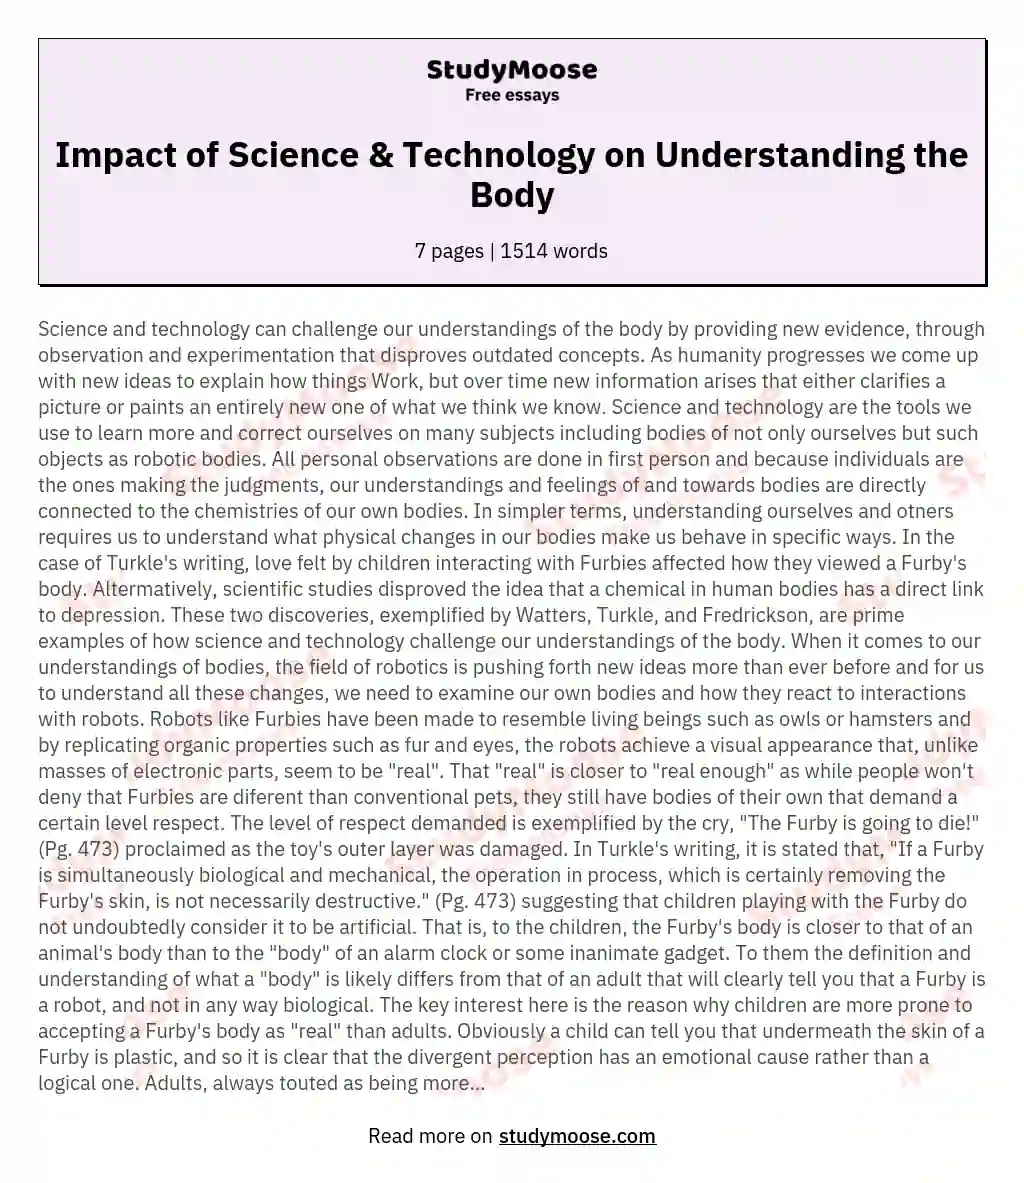 Impact of Science & Technology on Understanding the Body essay